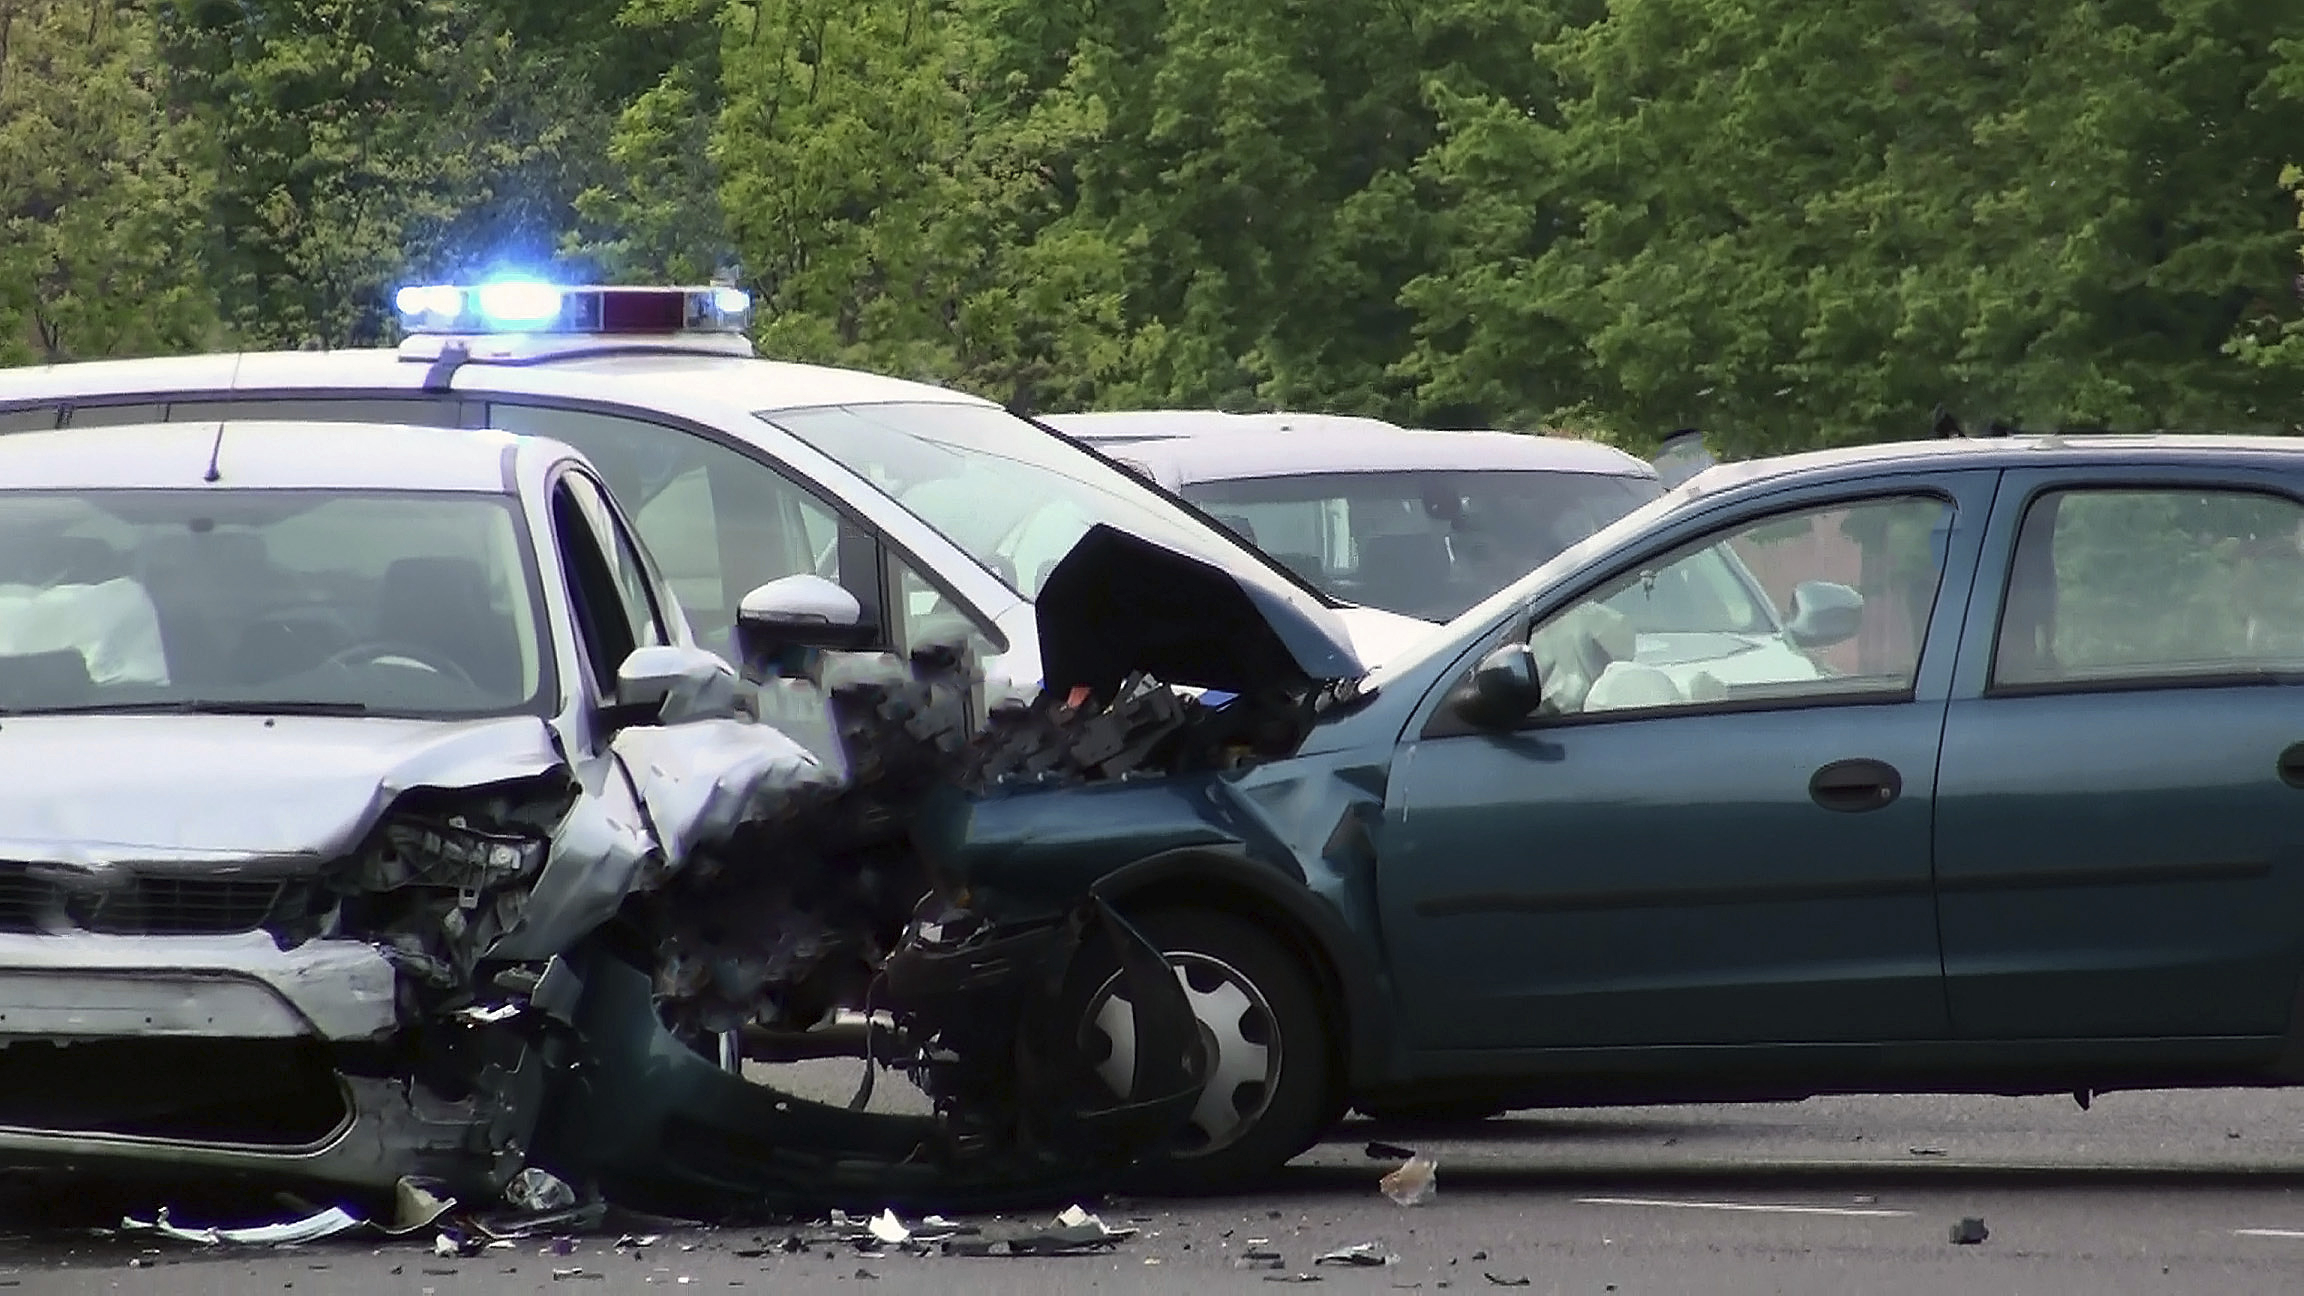 The biggest distractions that cause car crashes - CBS News